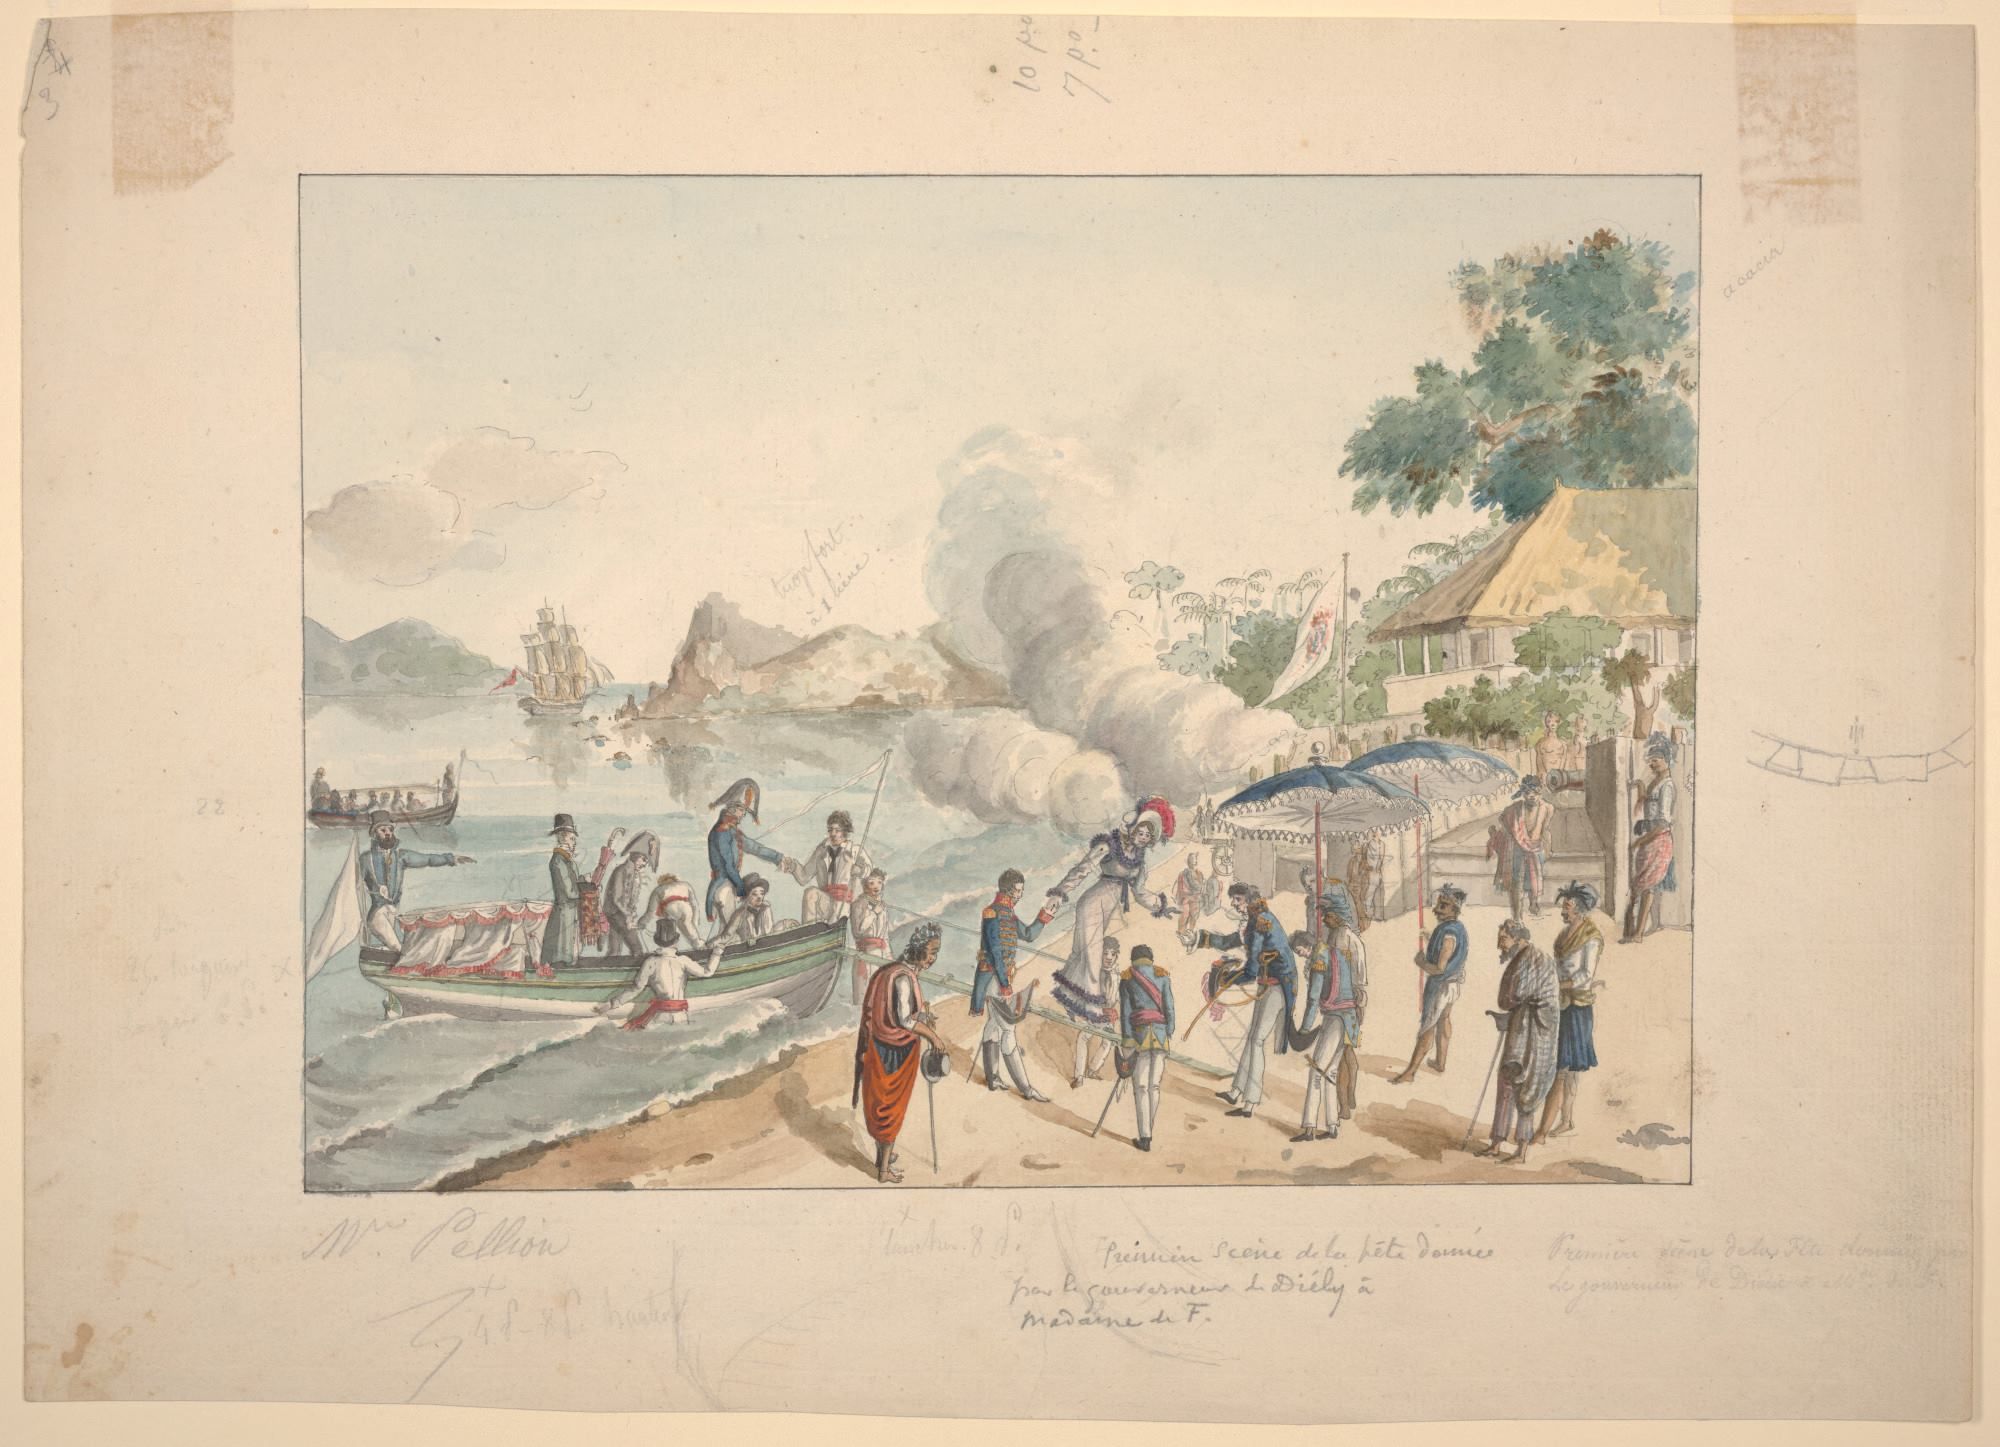 Watercolour painting depicting a group greeting people disembarking from a small boat